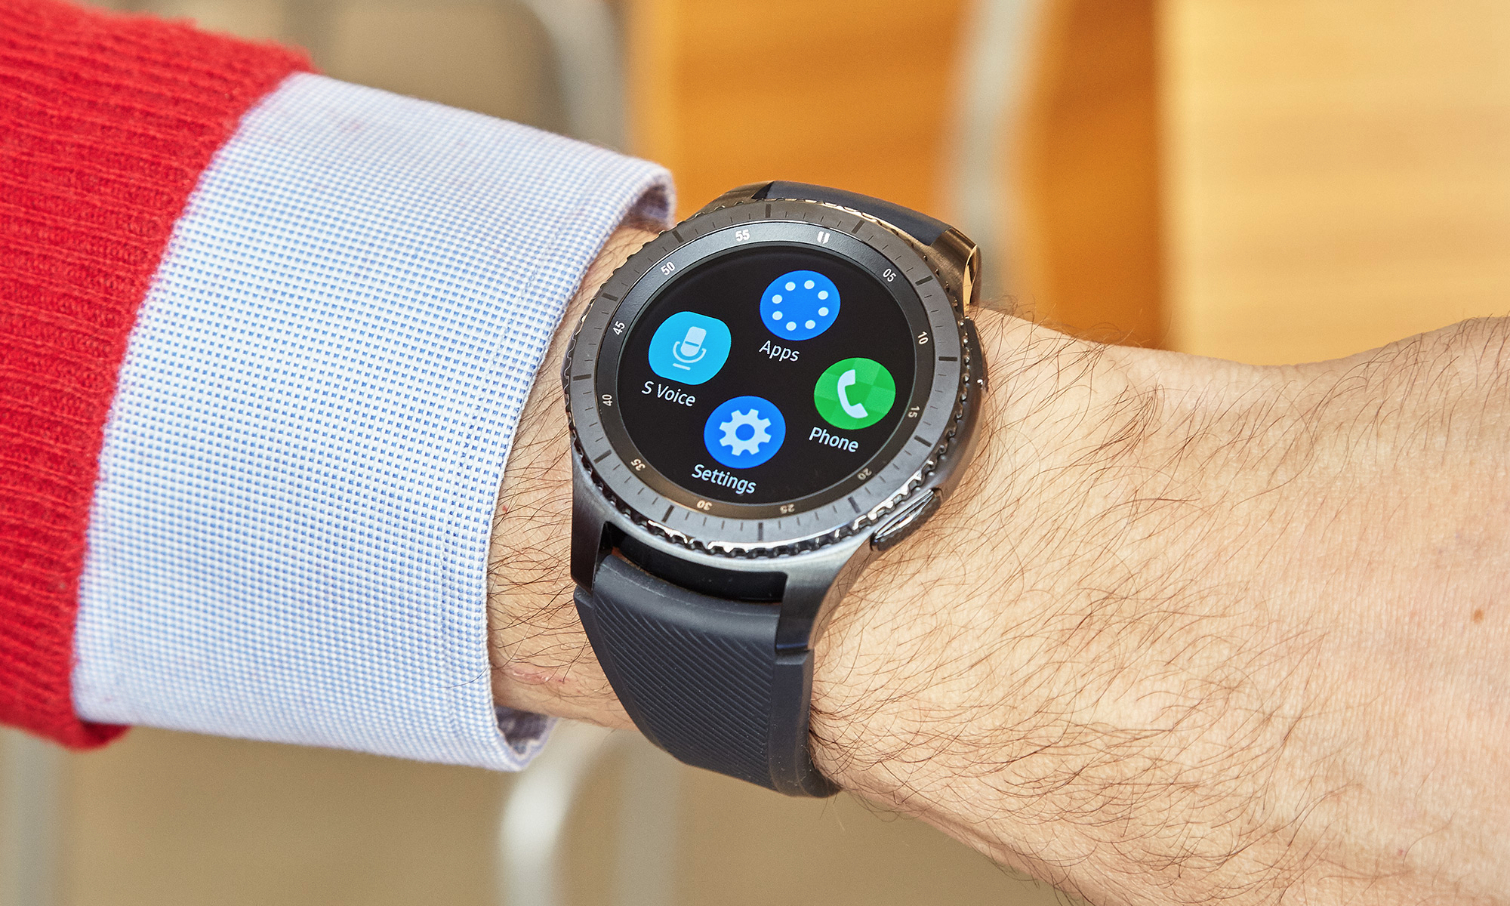 Samsung Gear S3 Frontier Review: Why It's the Best Smartwatch | Tom's Guide